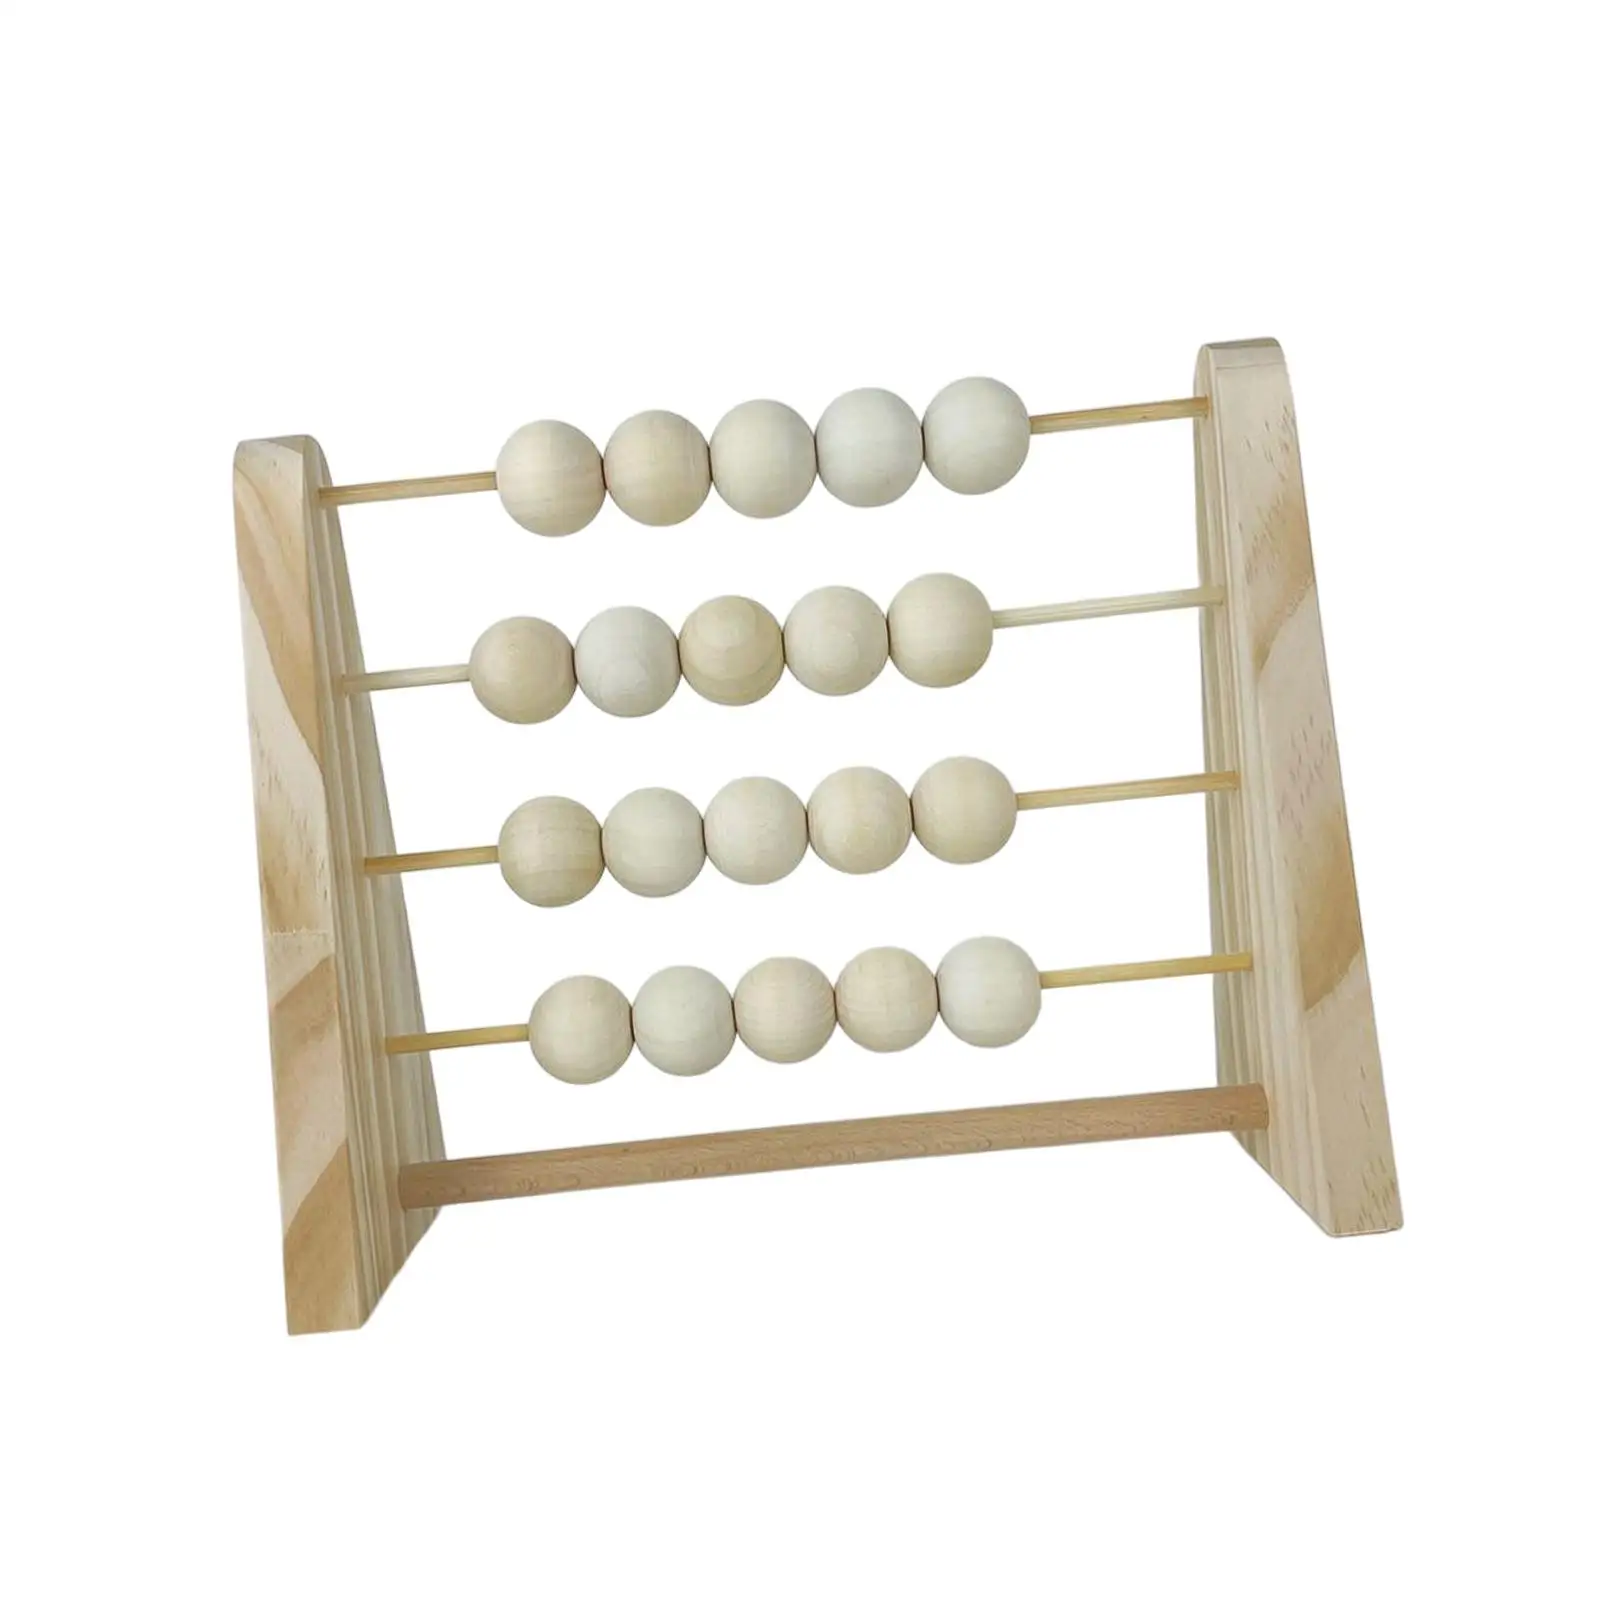 Wooden Abacus for Kids Math Wooden Beads Counting Frame for Boy Girl Kids